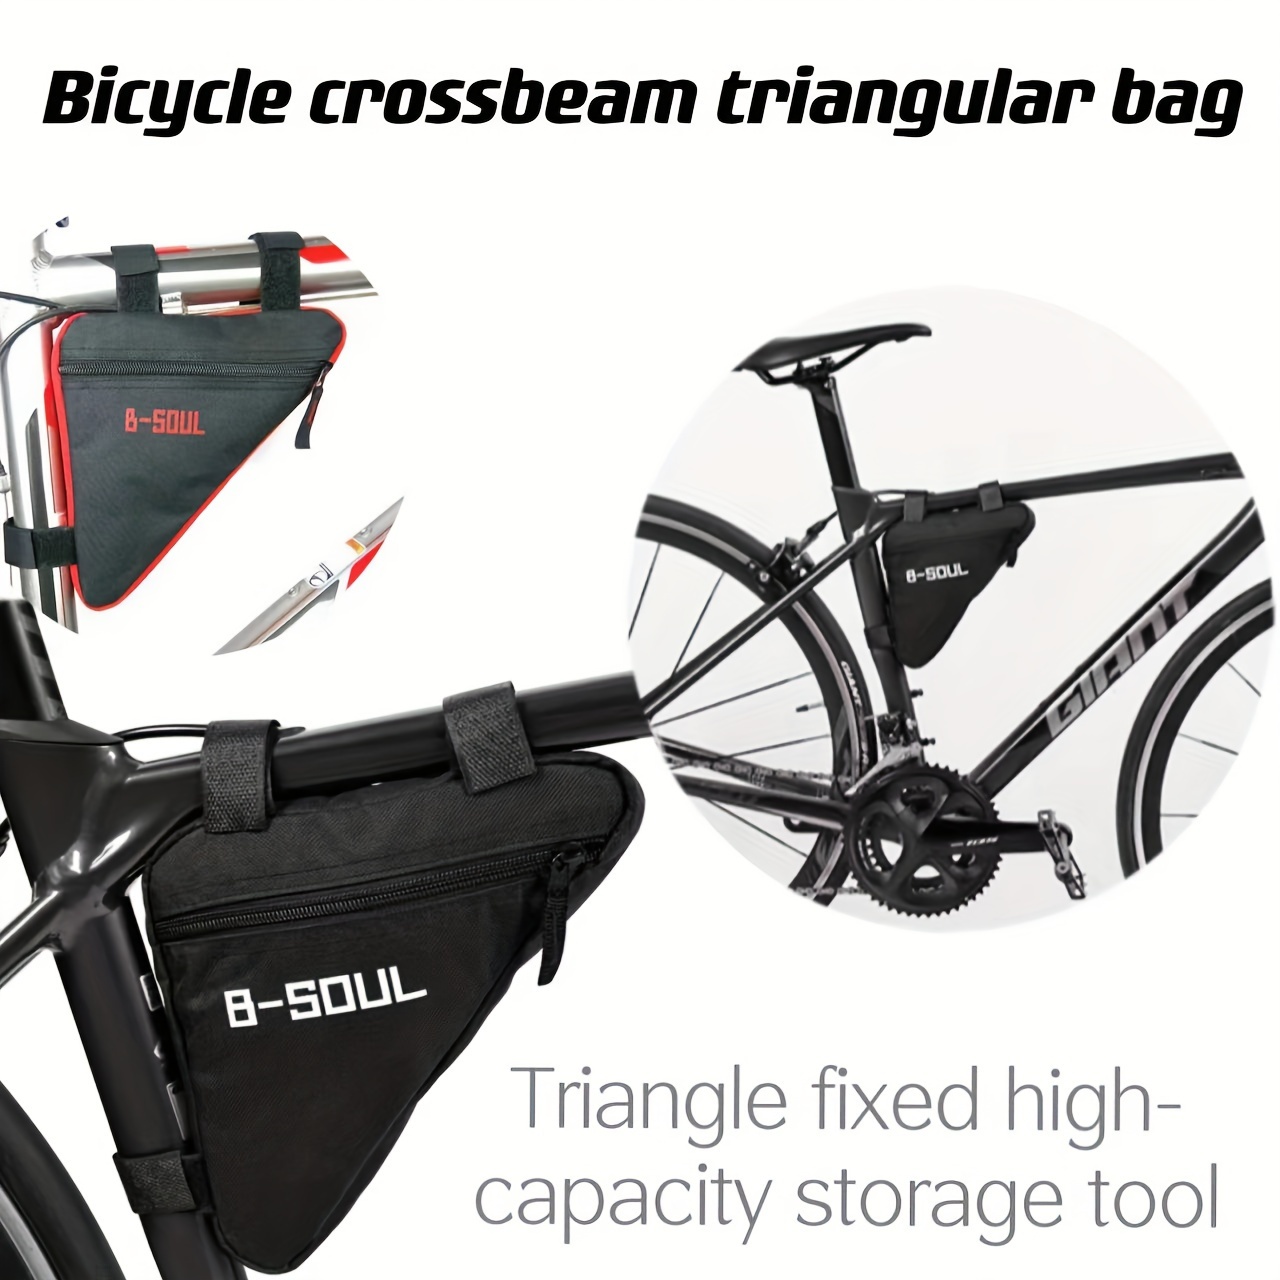 

1pc B-soul High-capacity Bicycle Frame Triangle Bag, Quick-release Crossbeam Pouch For Mountain Bikes, Cycling Gear Accessory, Durable Storage Tool